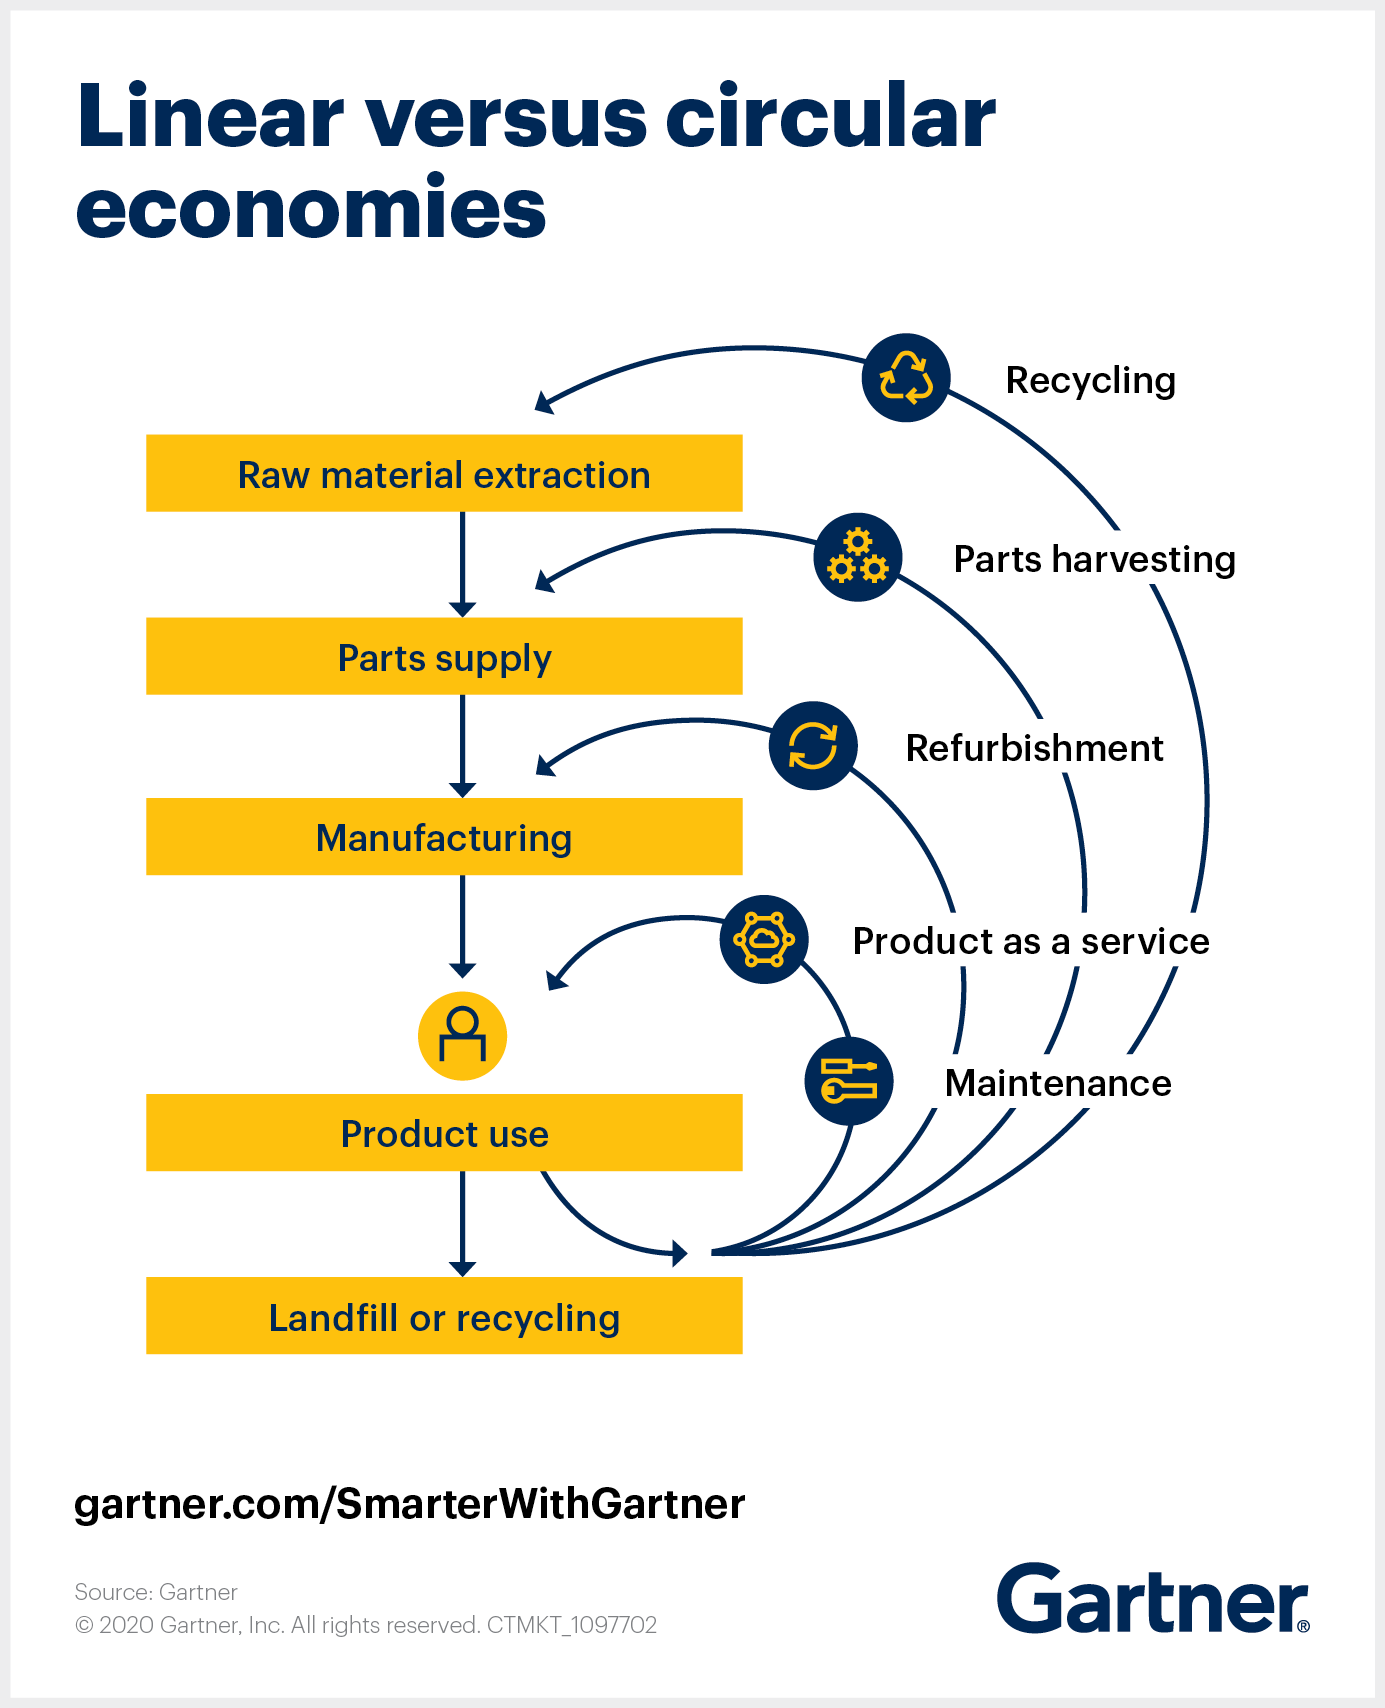 Gartner shows how a circular economy moves away from the traditional consumption-based linear economy to achieve raw materials resilience.